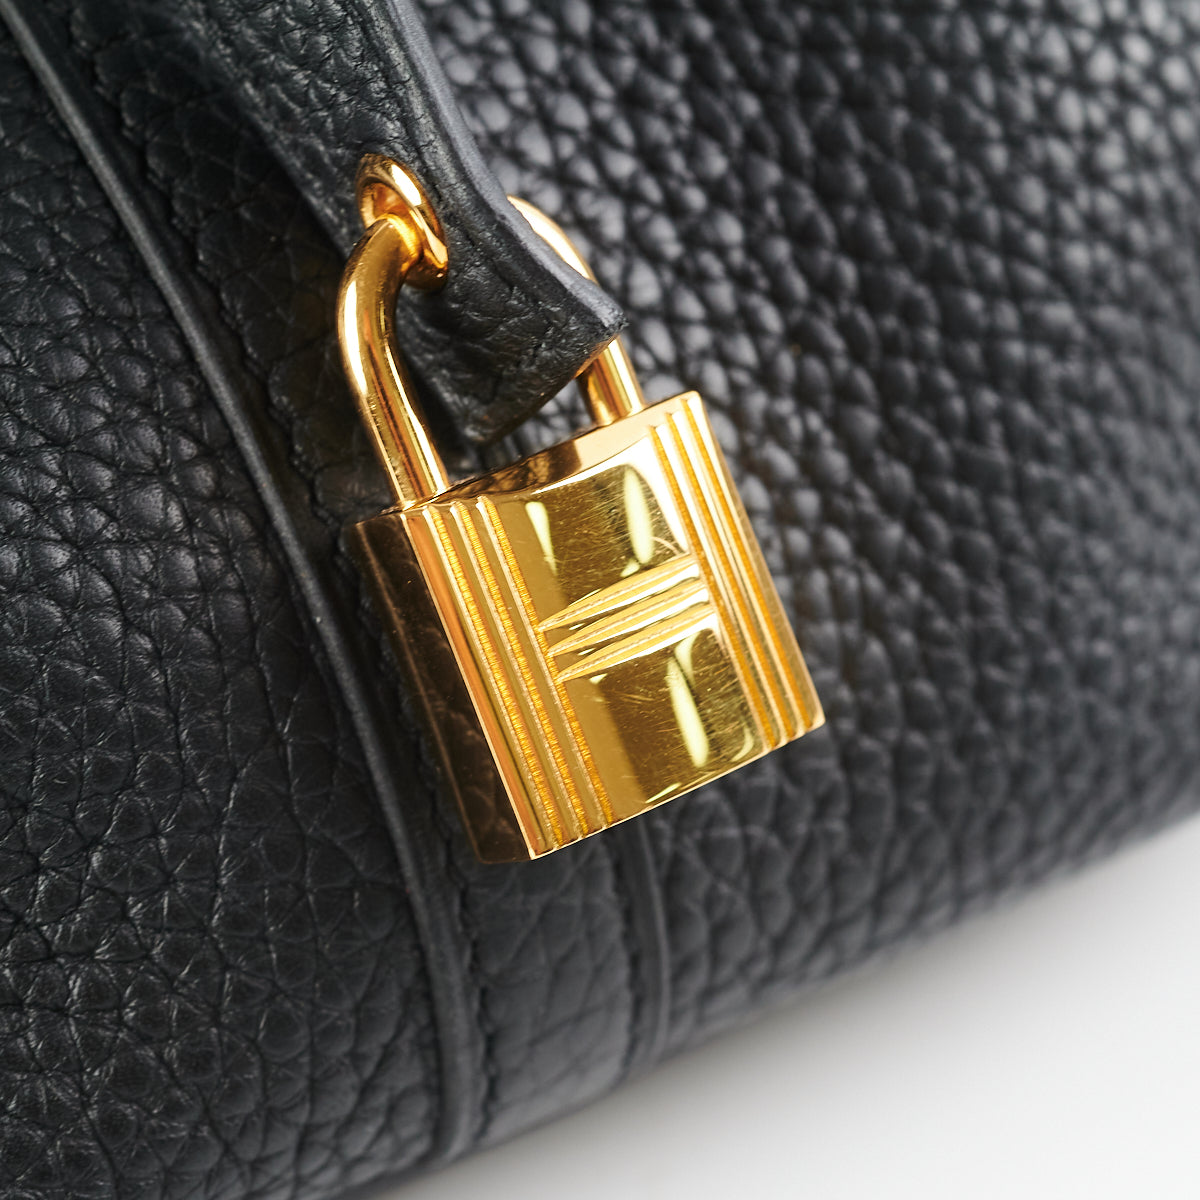 1000% AUTH!!! 🖤 HERMES PICOTIN 22 🖤 P22 NUIT BLACK STAMP A PHW